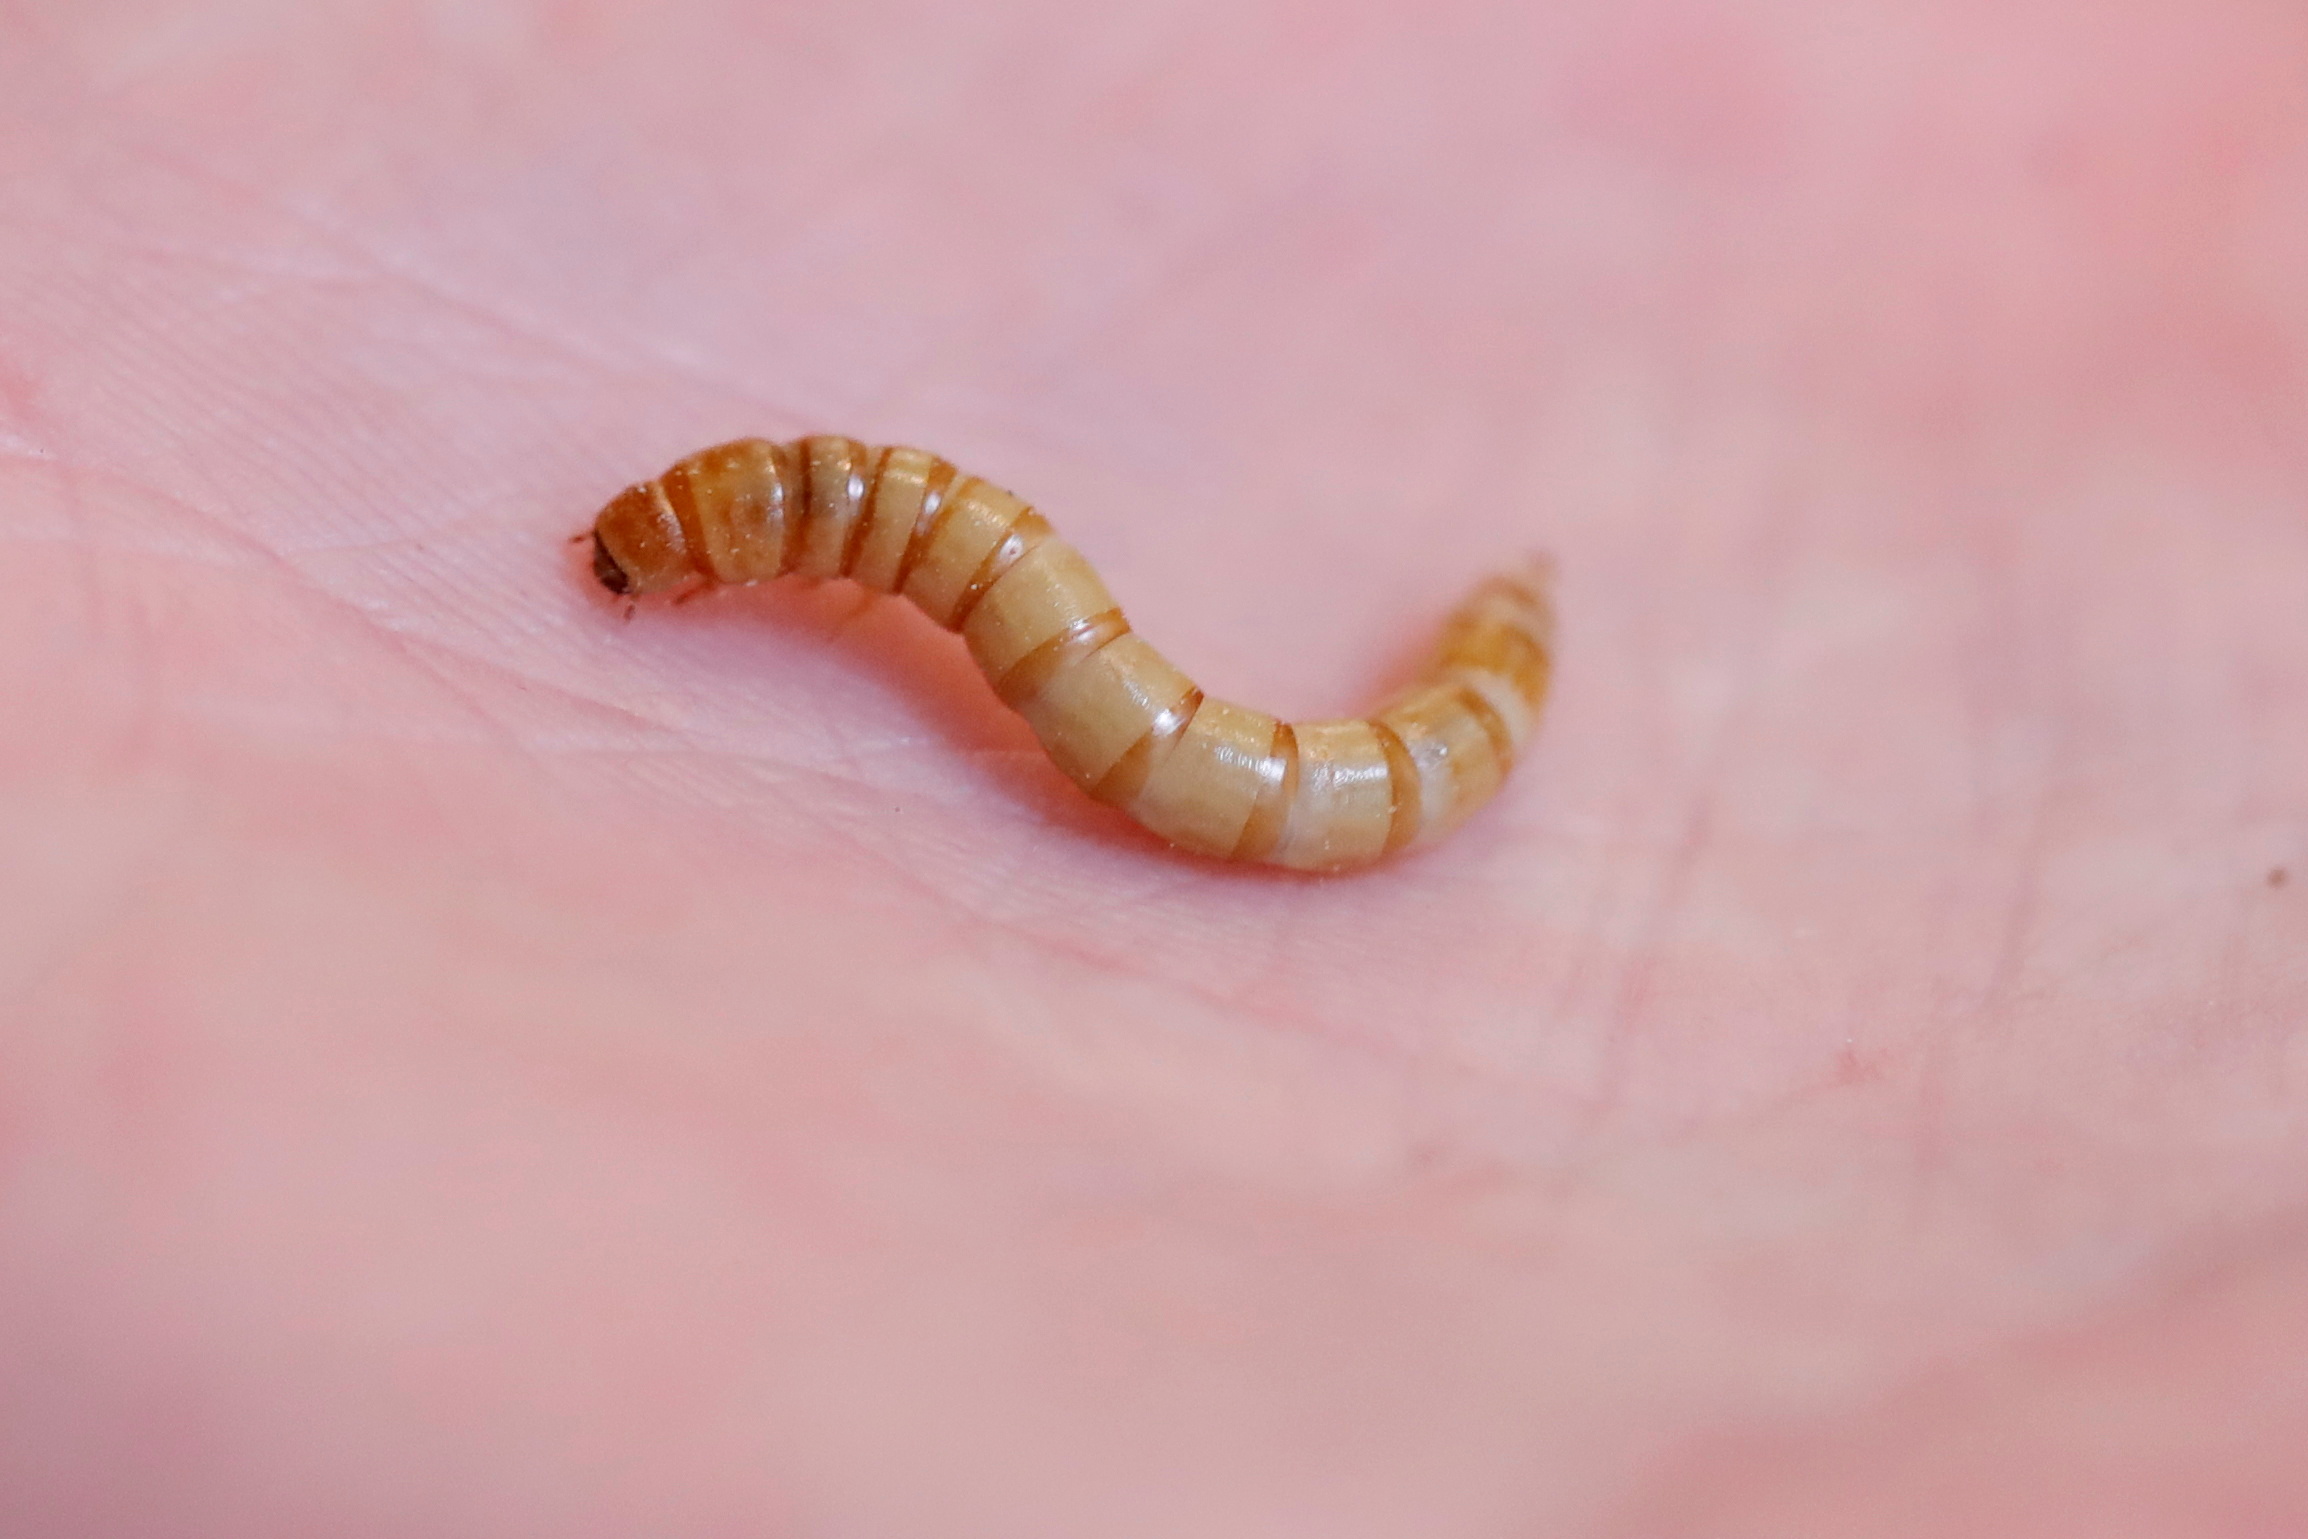 Insects on the menu: EU gives green light to eating mealworms